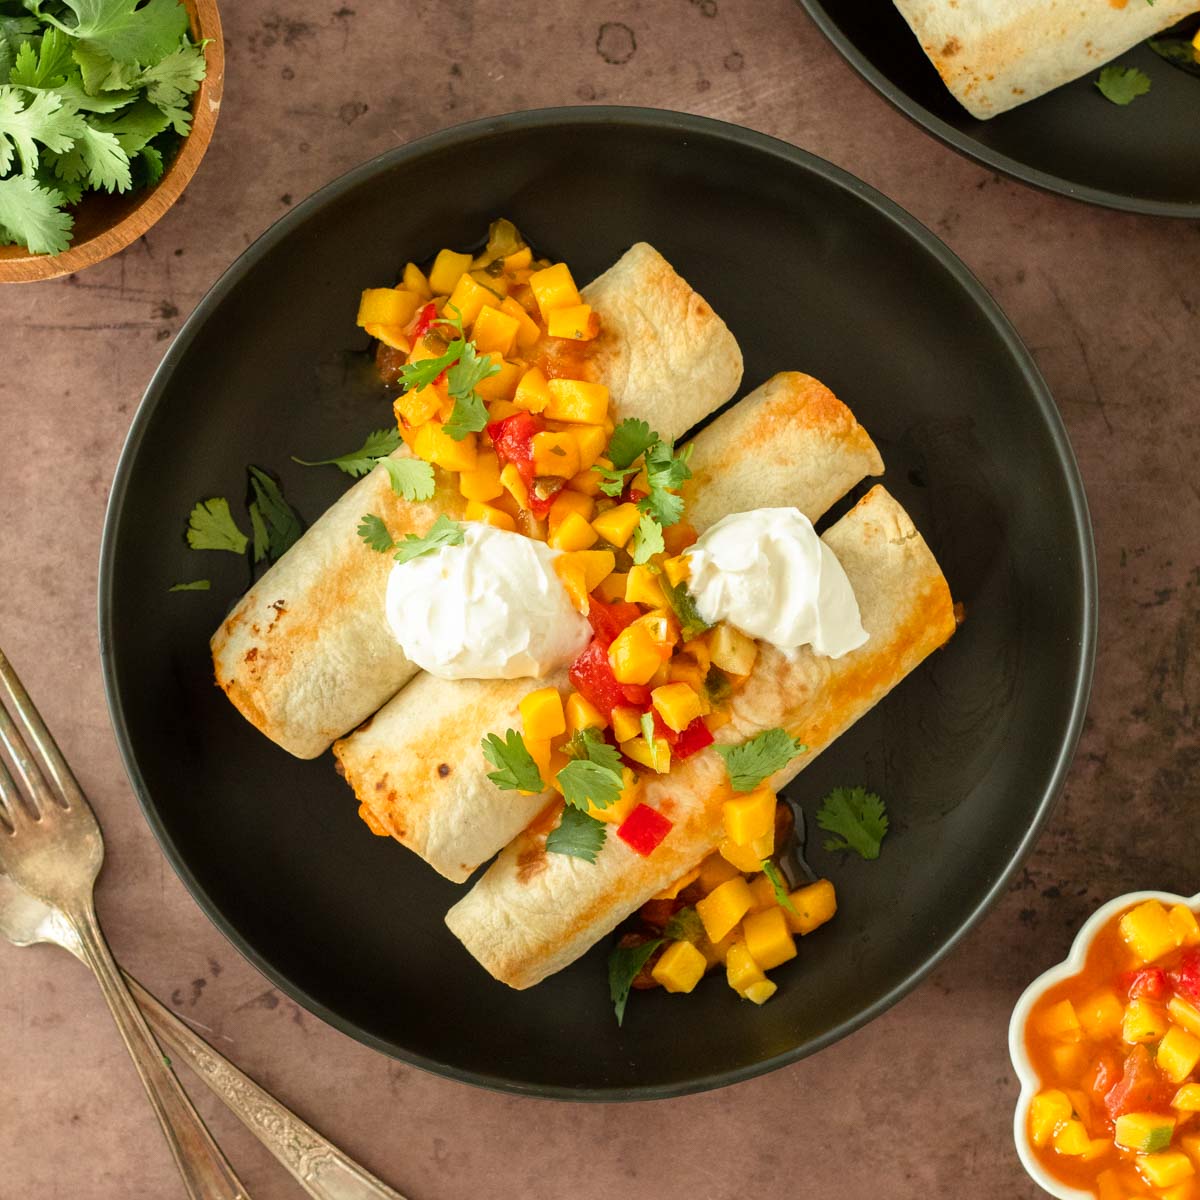 These easy beef taquitos are a 5-ingredient dinner recipe made with tortillas stuffed with a flavorful beef mixture and cheese. Serve these beef taquitos as an appetizer or for an easy dinner recipe.